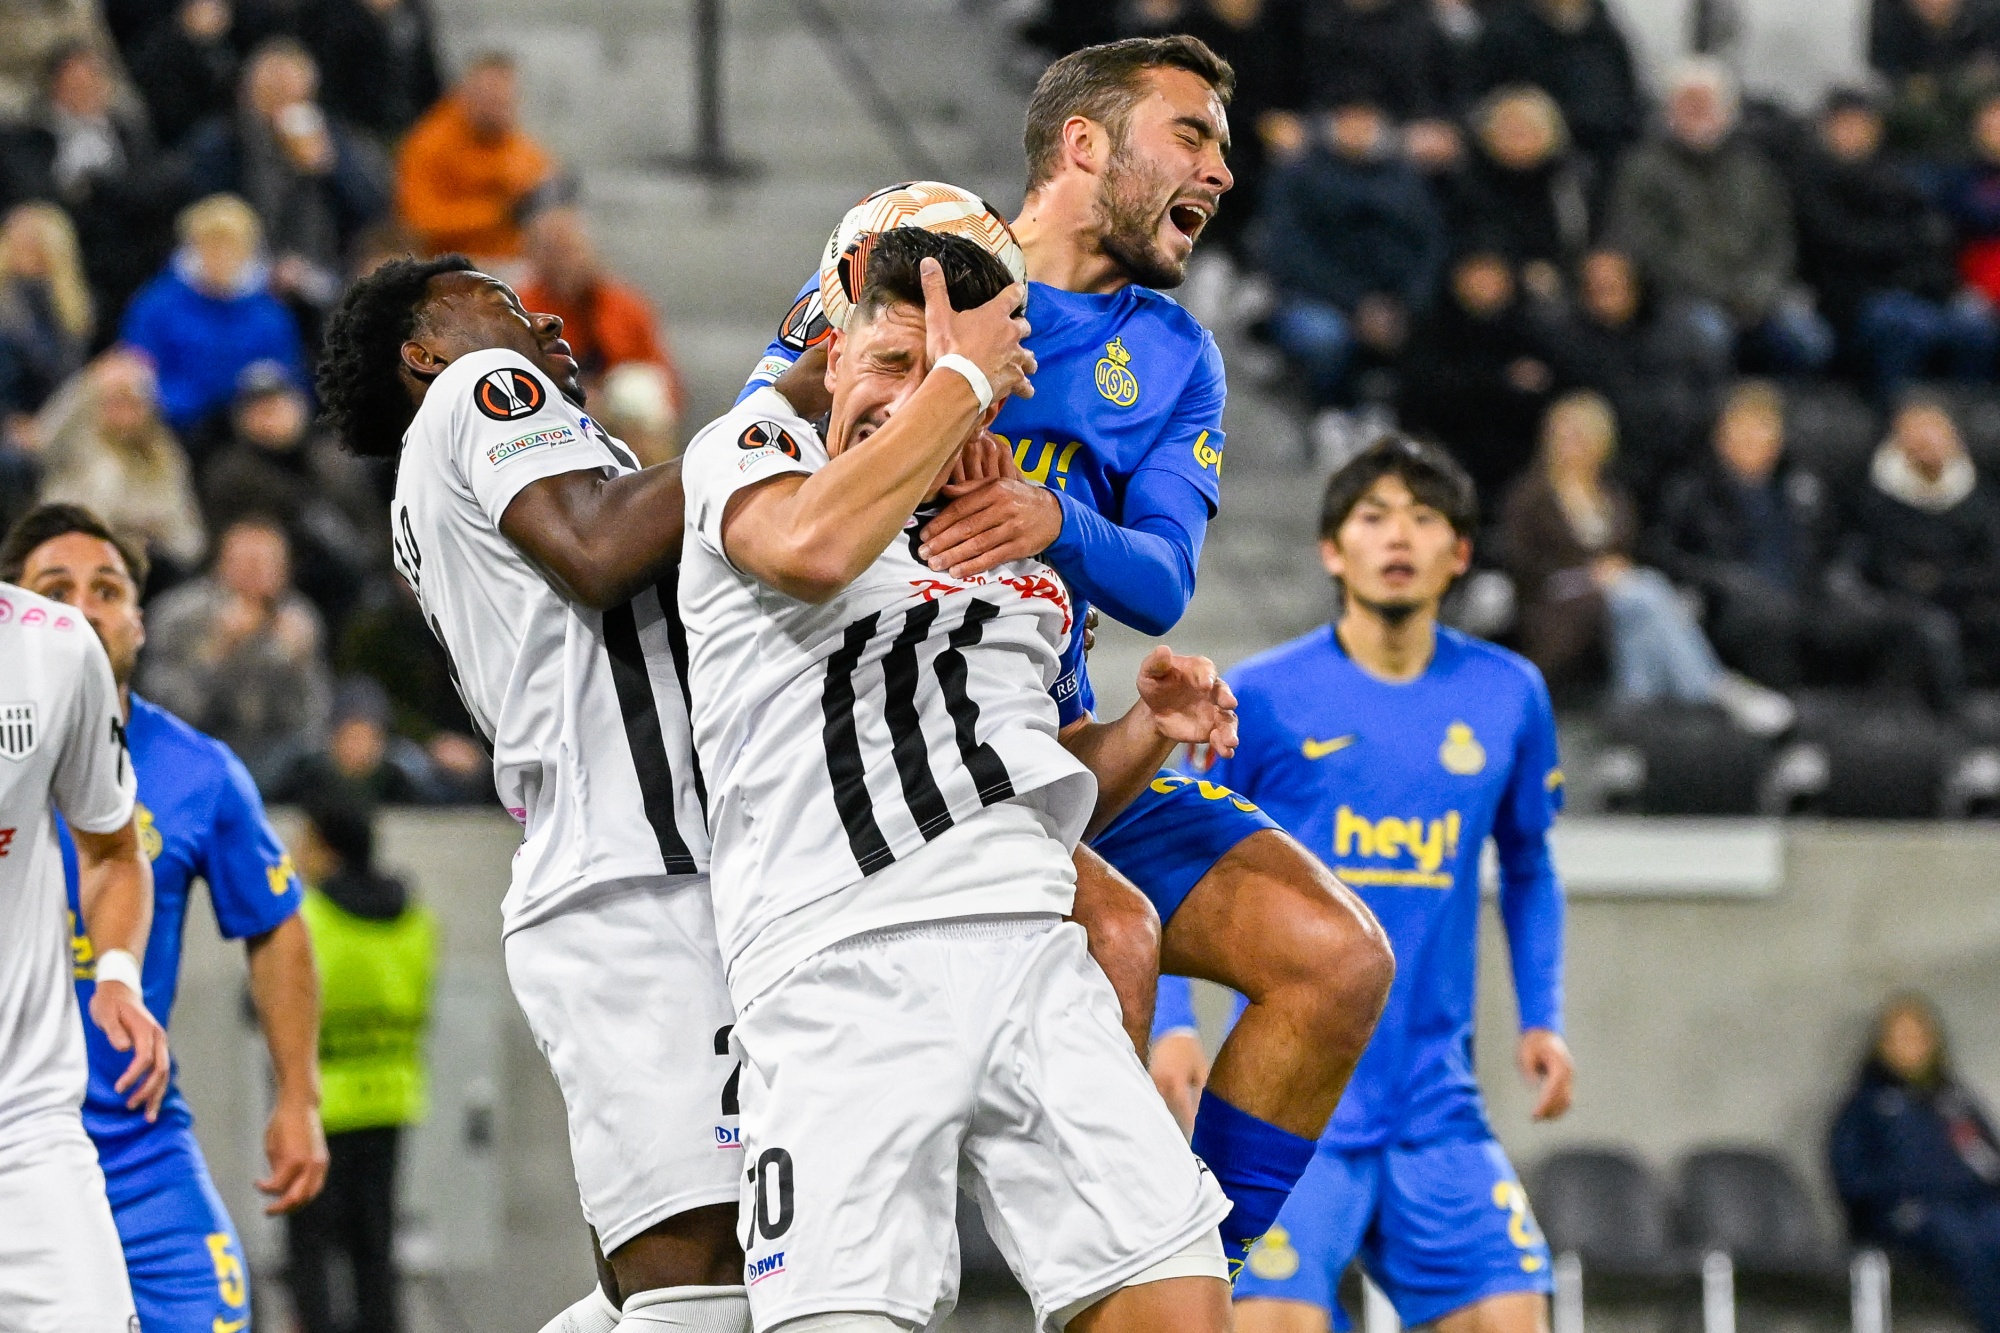 LASK's George Bello, LASK's Robert Zulj and Union's Charles Vanhoutte fight for the ball during a soccer game between Austrian Linzer Athletik-Sport-Klub (LASK) and Belgian Royale Union Saint Gilloise in Linz, Austria, on Thursday 09 November 2023, on day 4 in the group phase of the UEFA Europa League competition, in group E. BELGA PHOTO LAURIE DIEFFEMBACQ